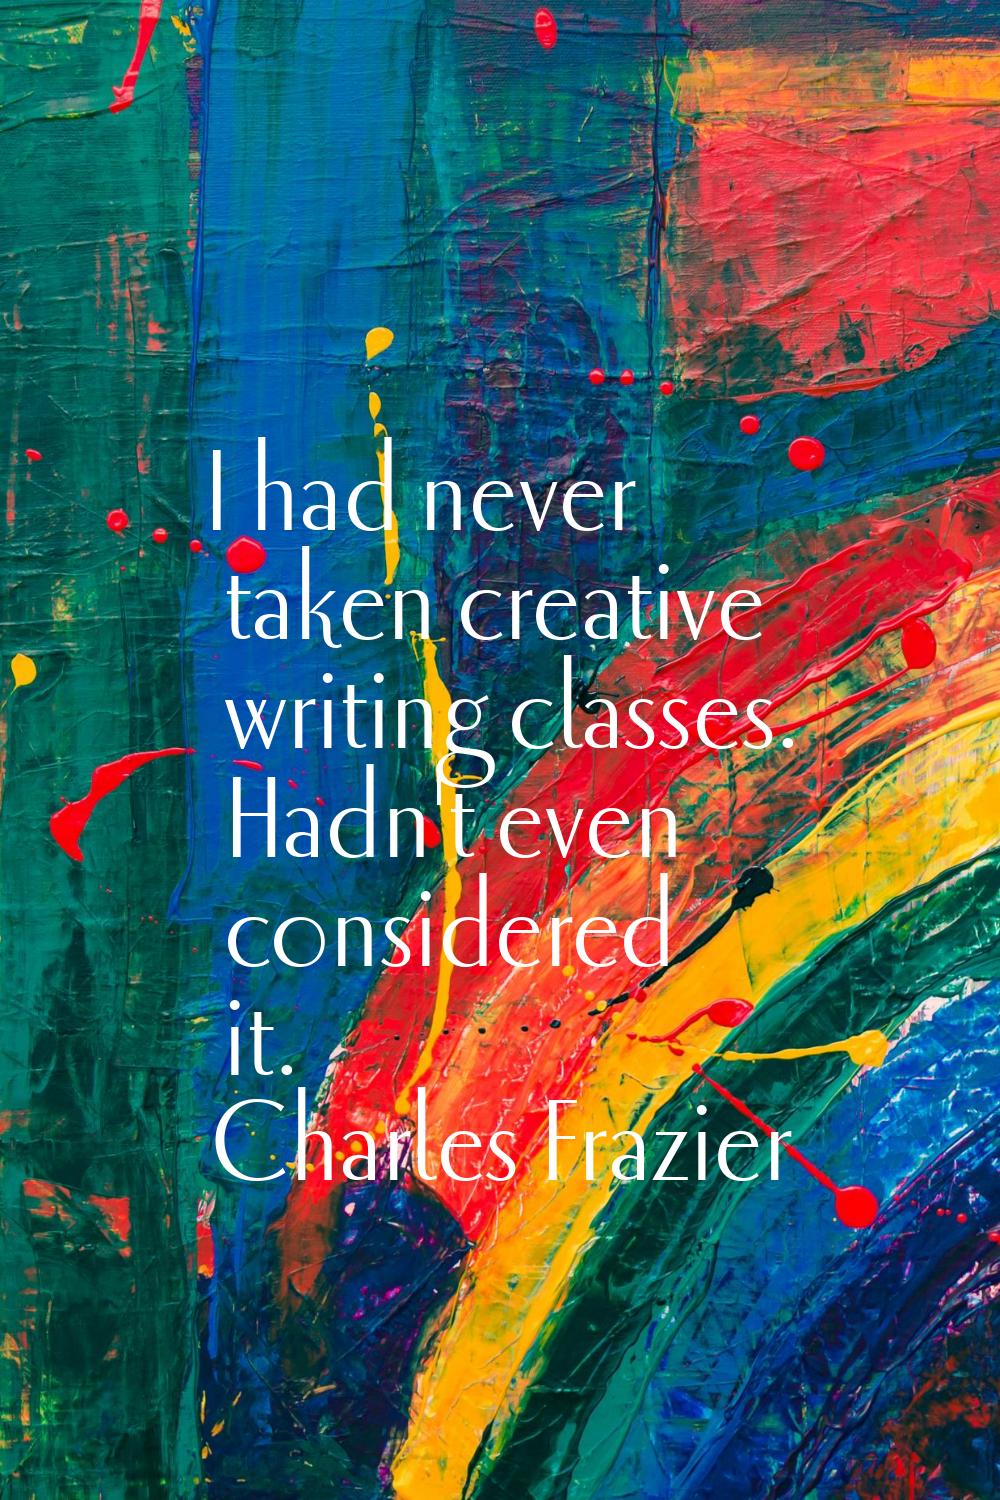 I had never taken creative writing classes. Hadn't even considered it.